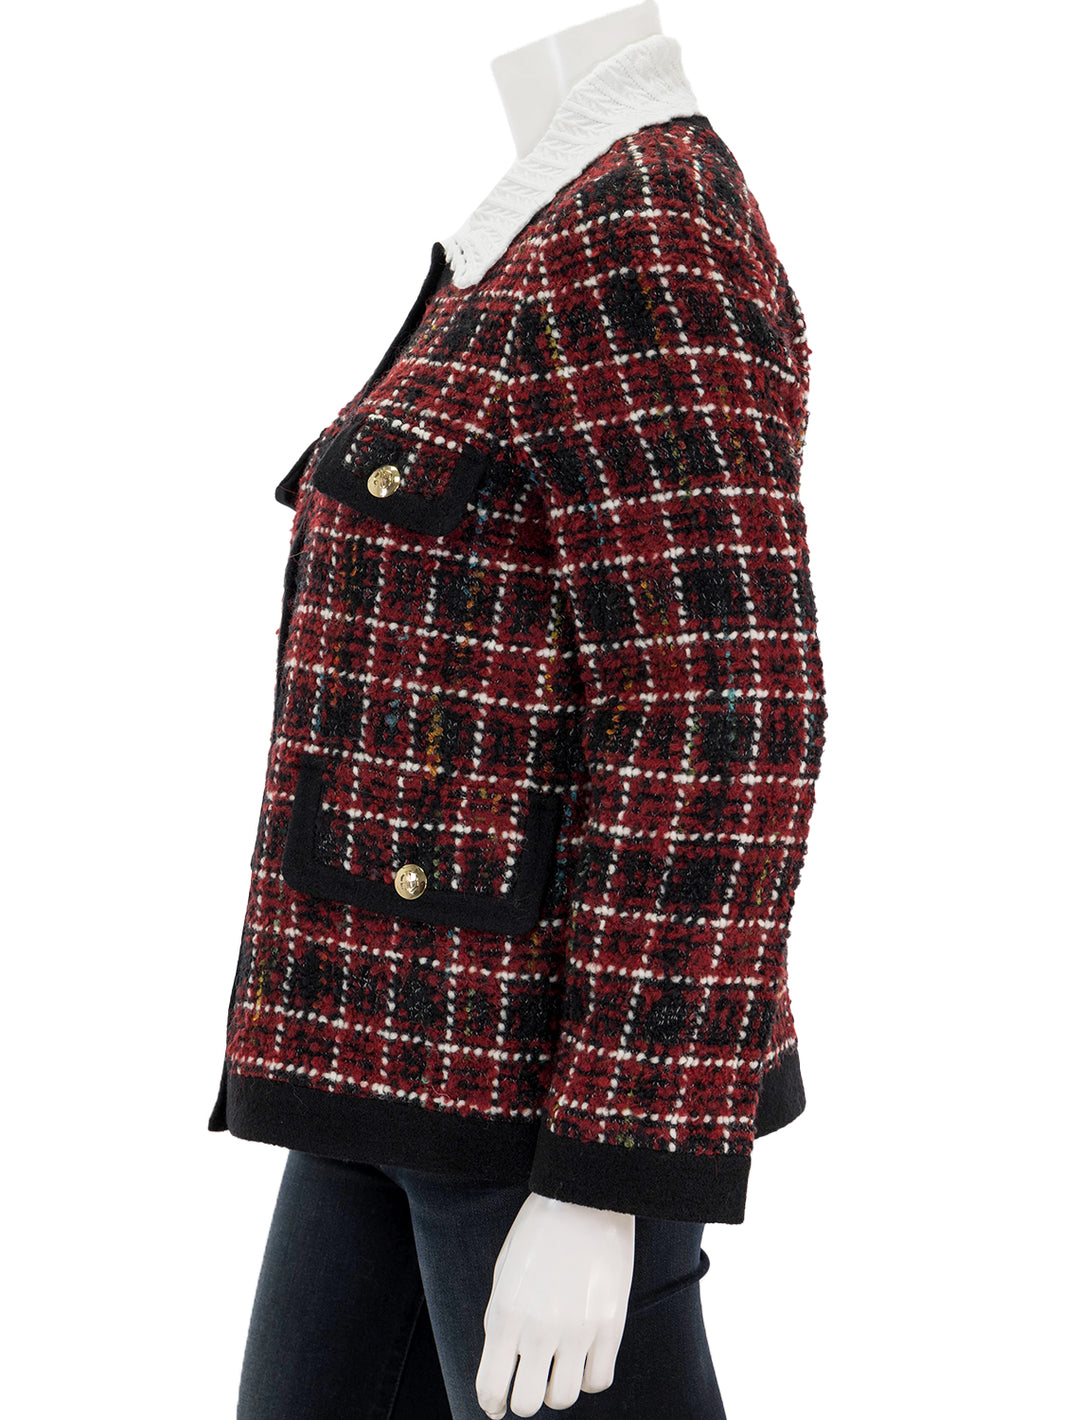 Side view of Anine Bing's lydia jacket in cherry plaid.